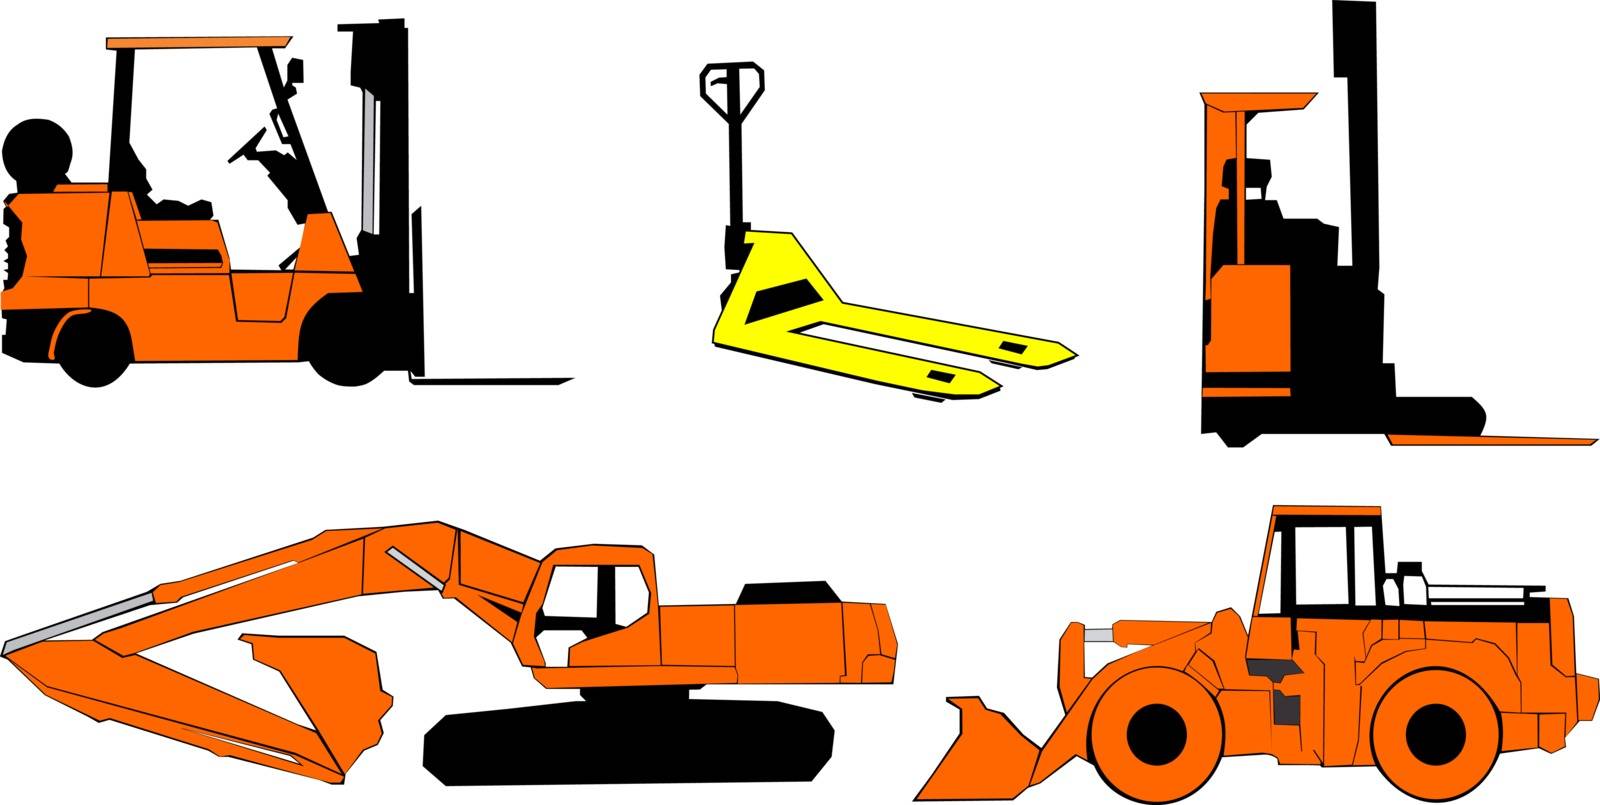 Construction machinery - Illustration, 
Construction and industrial machinery, vector